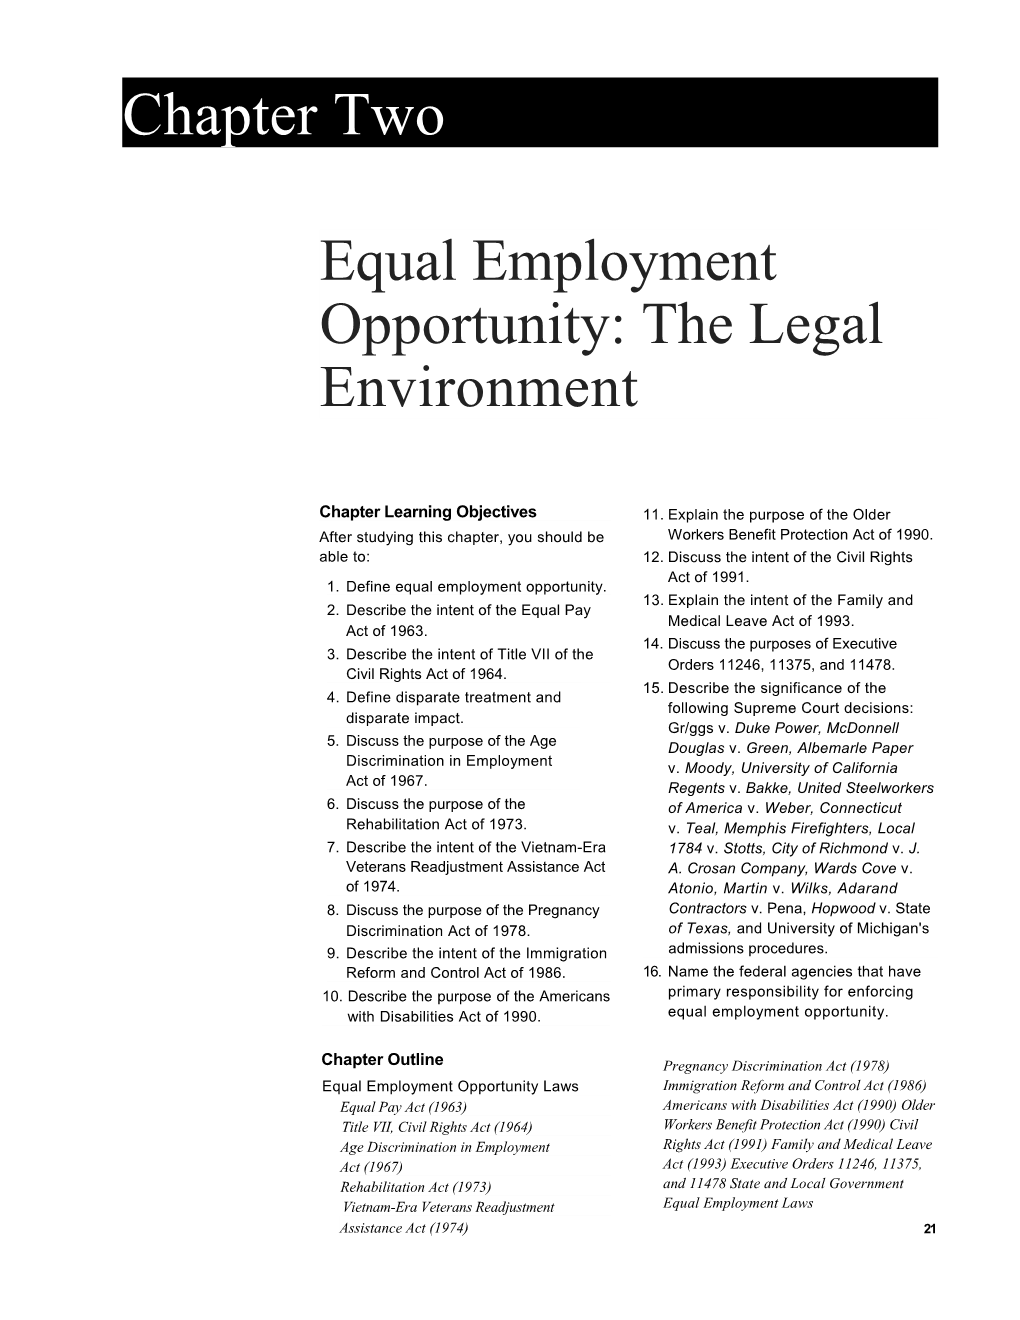 Equal Employment Opportunity: the Legal Environment